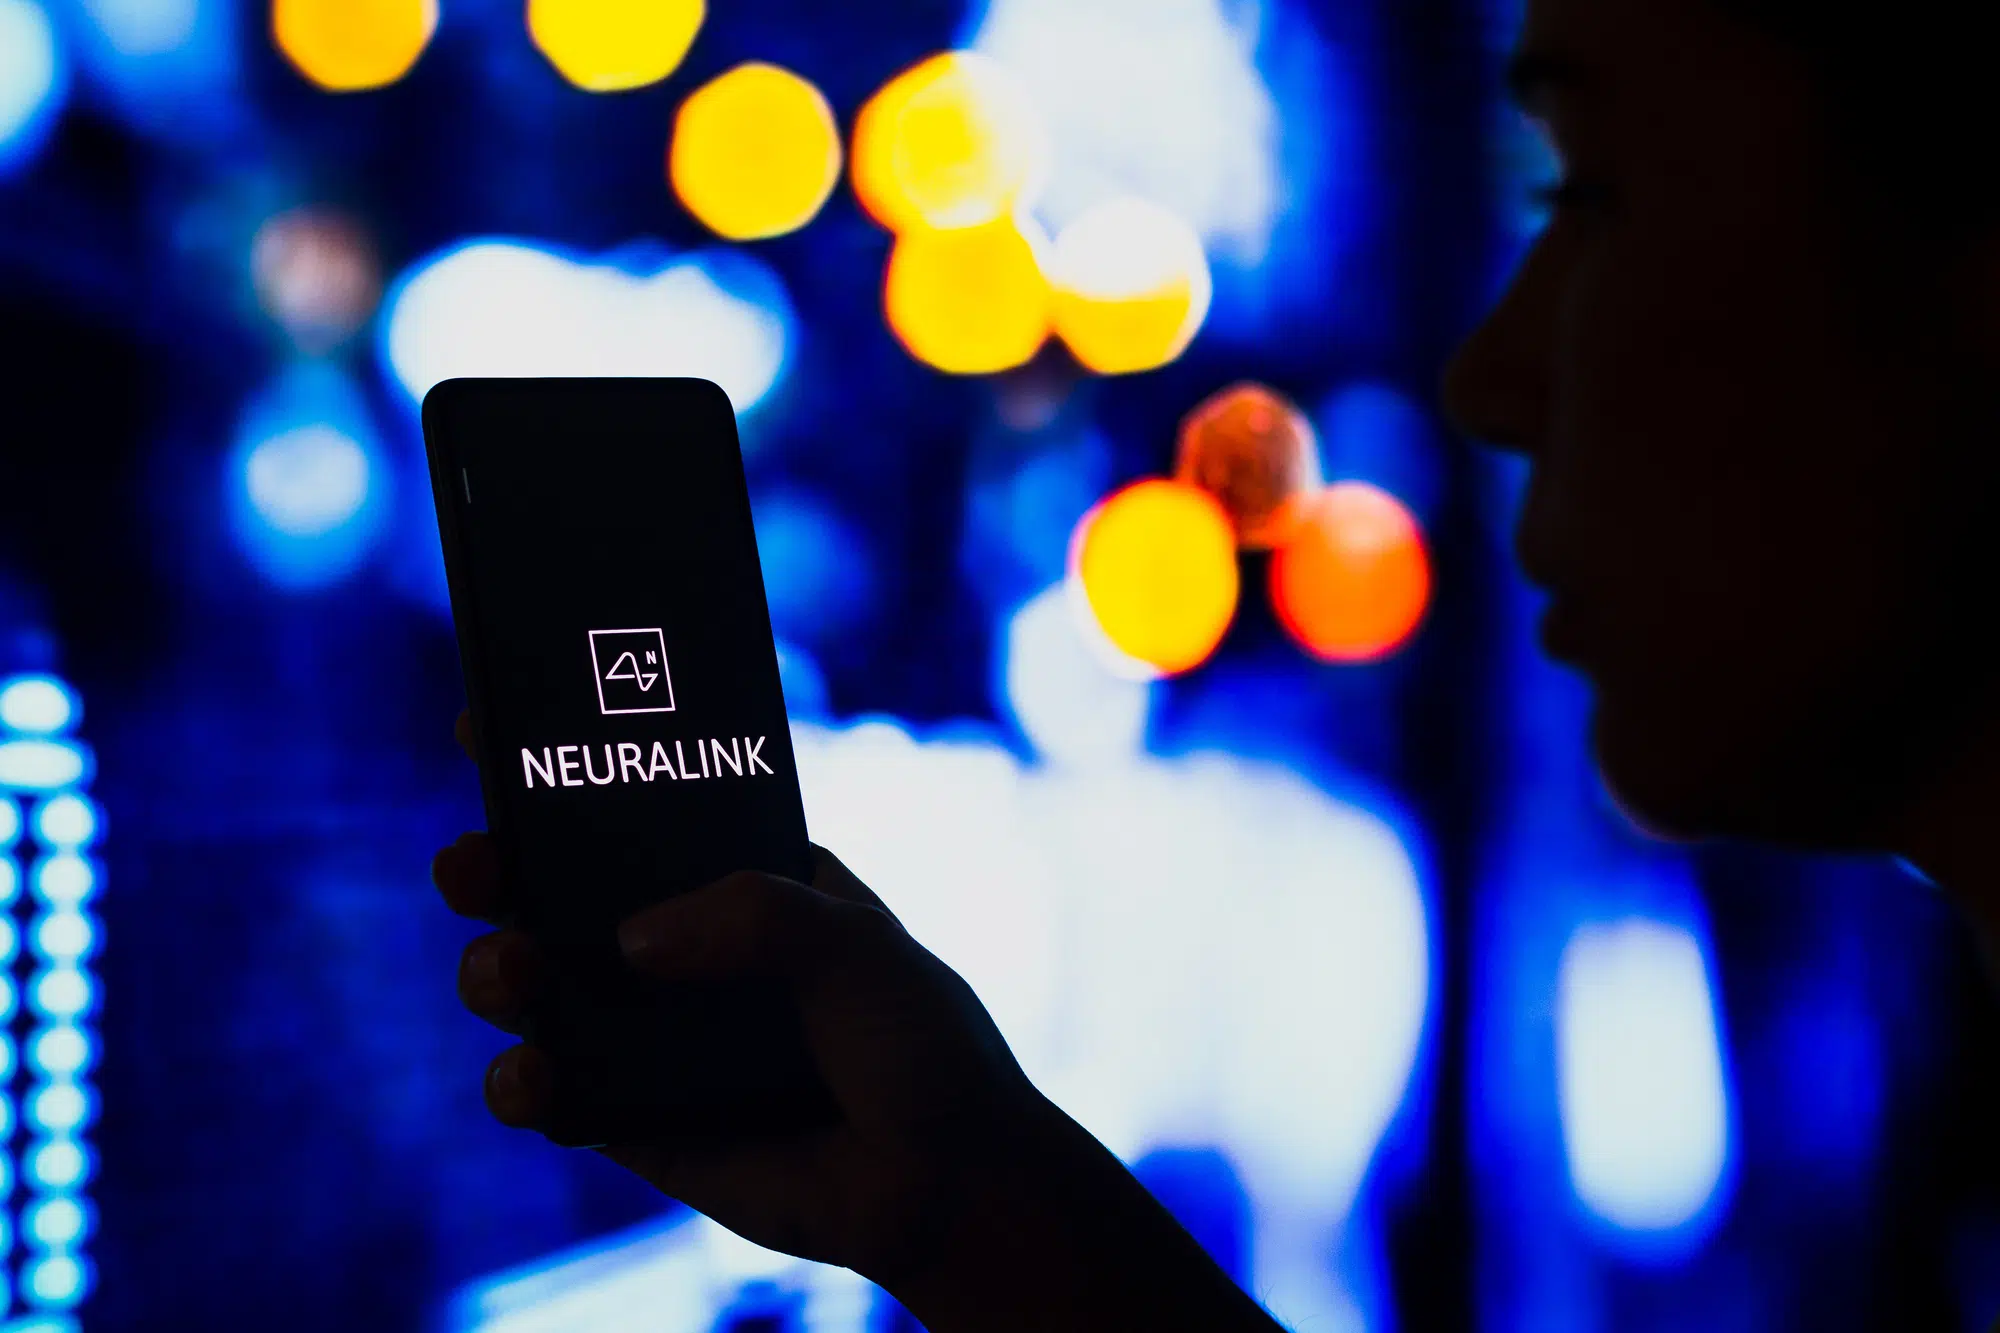 May 2, 2022, Brazil. In this photo illustration, a silhouetted woman holds a smartphone with the Neuralink logo displayed on the screen